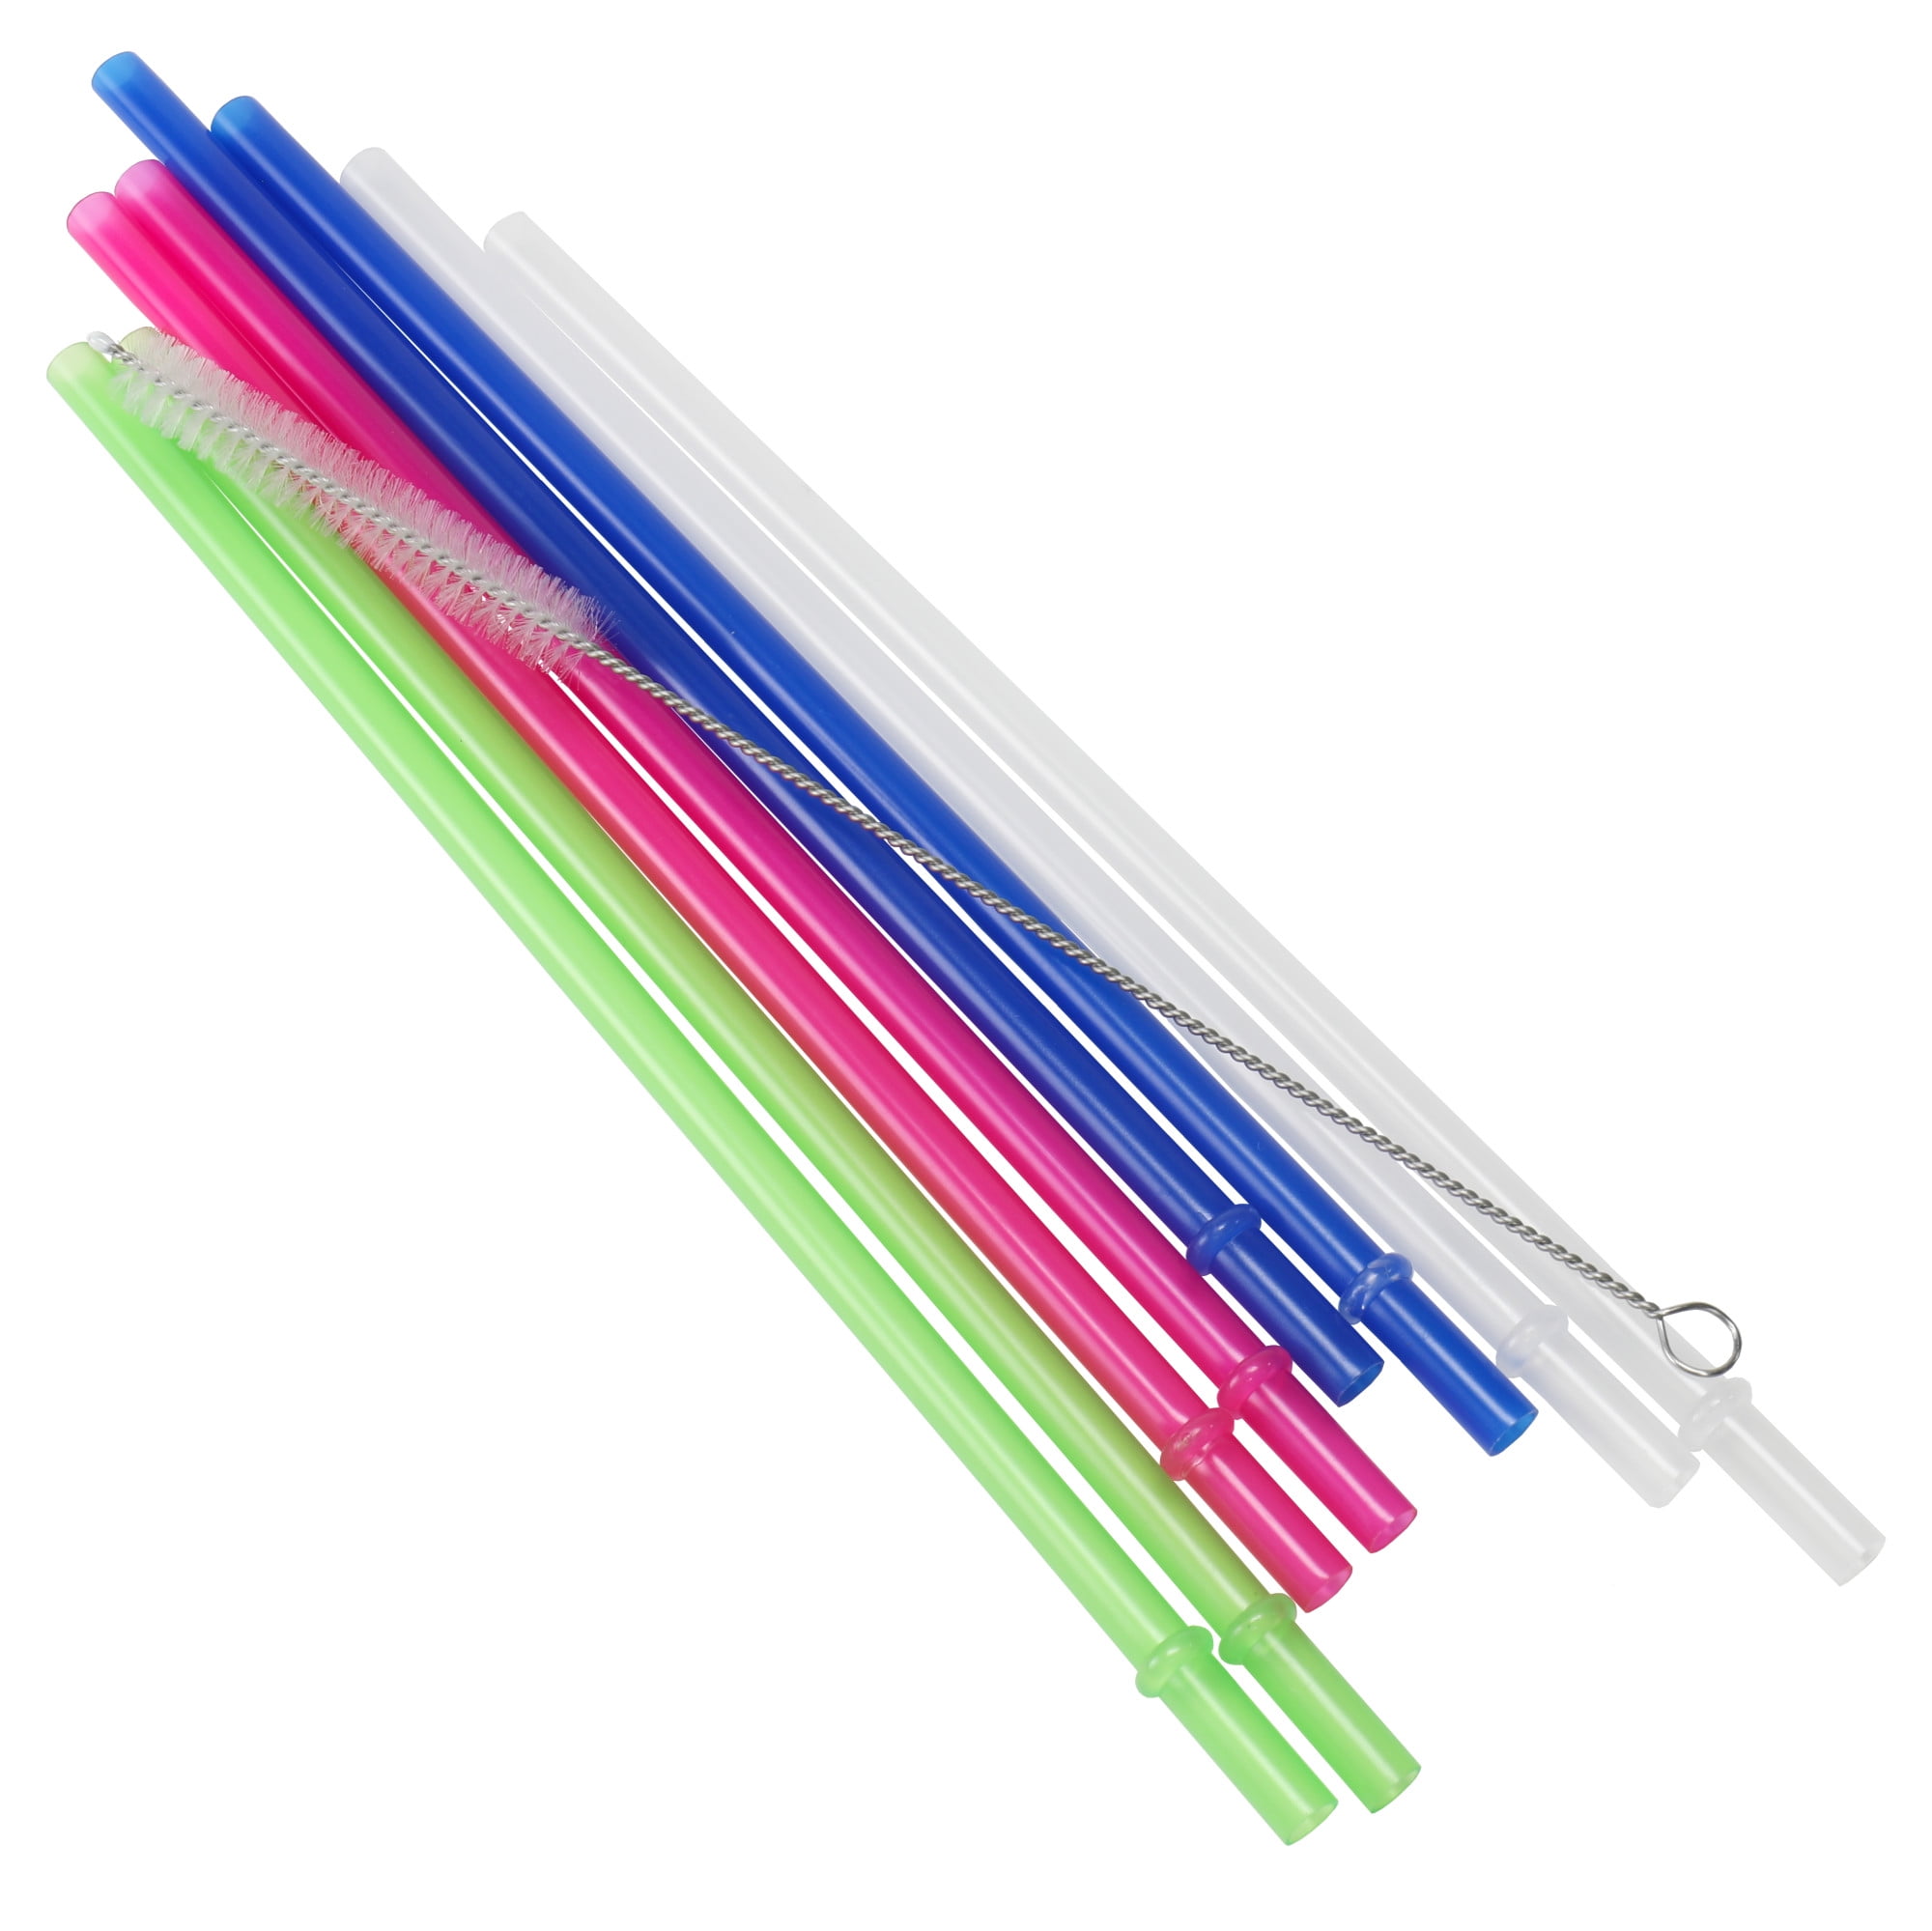 Chef Craft Select Hard Plastic Reusable Straw with Brush, 10.25